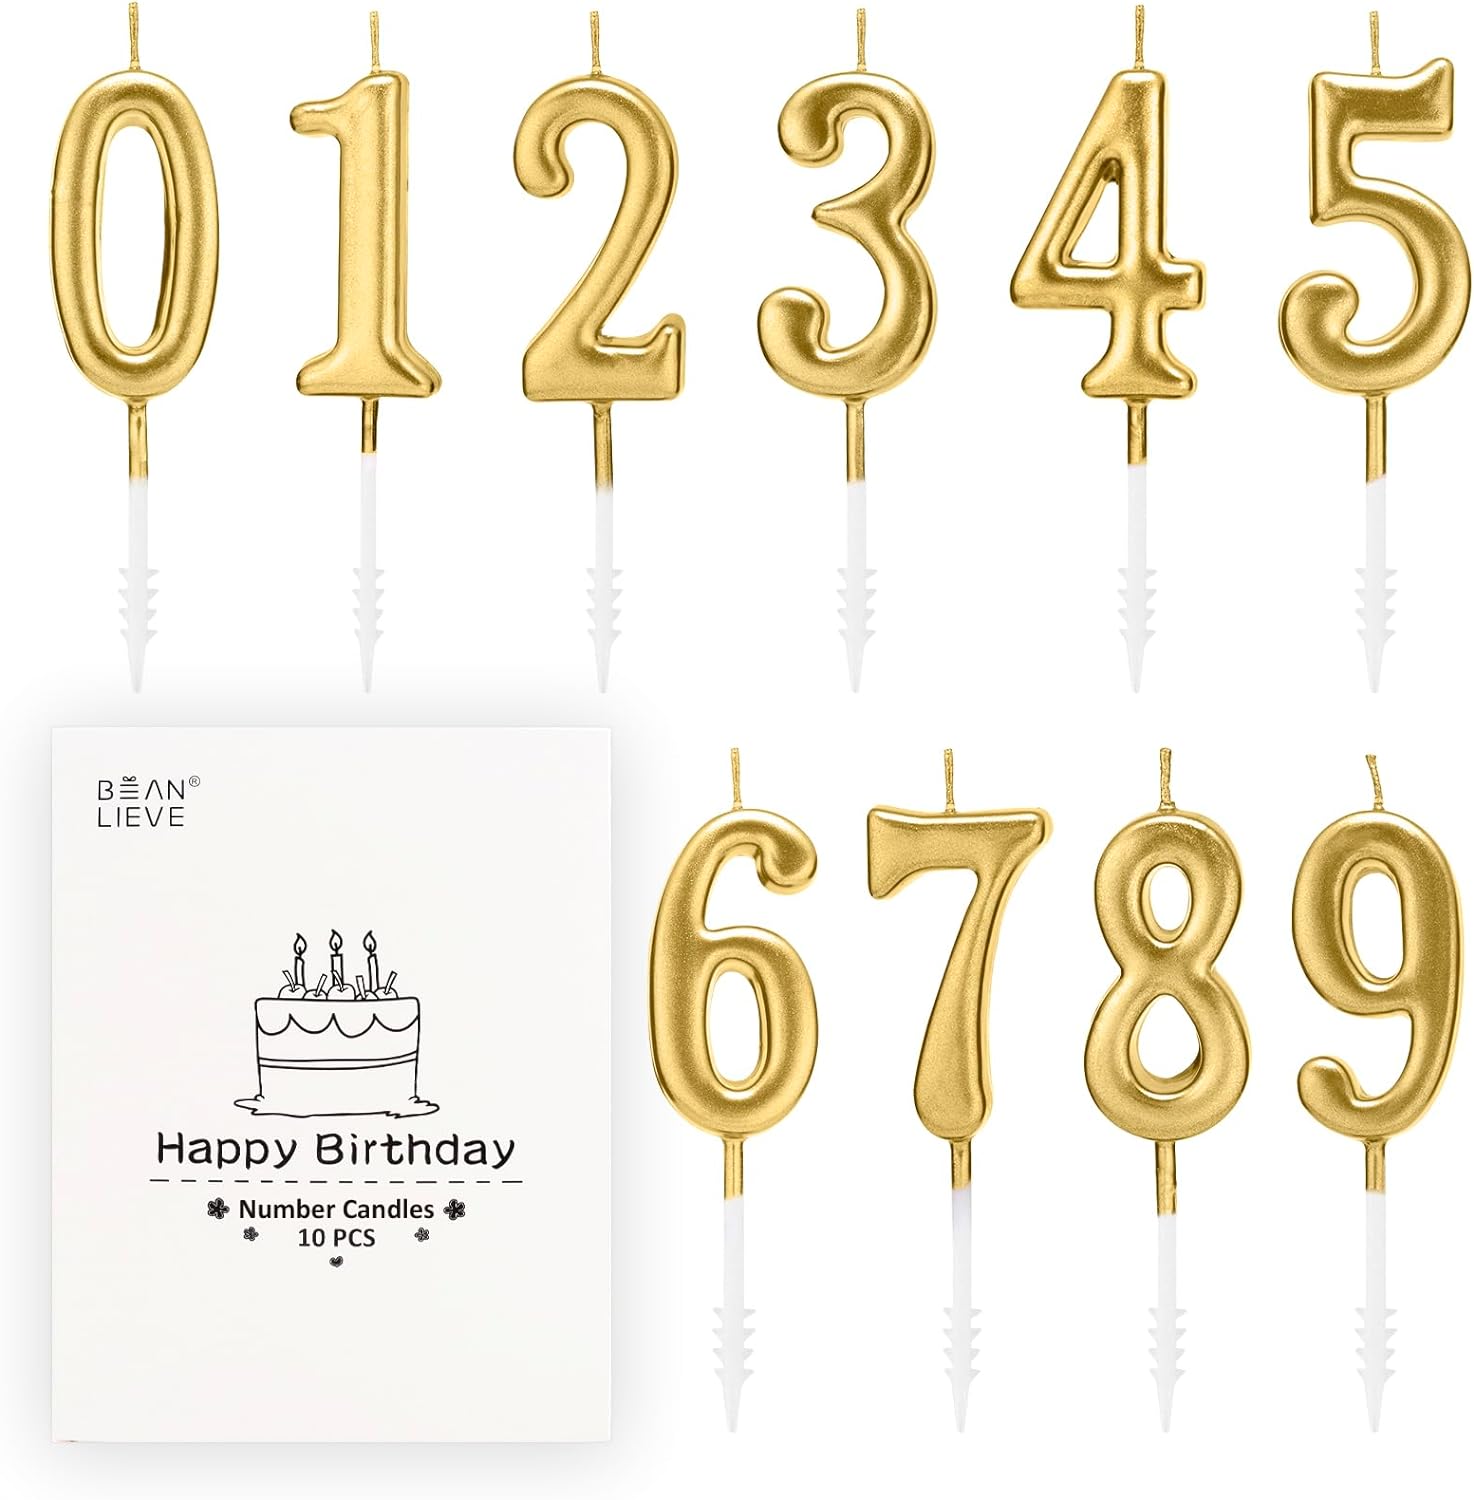 BEAN LIEVE Beanlieve 10-Pieces Numeral Birthday Candles